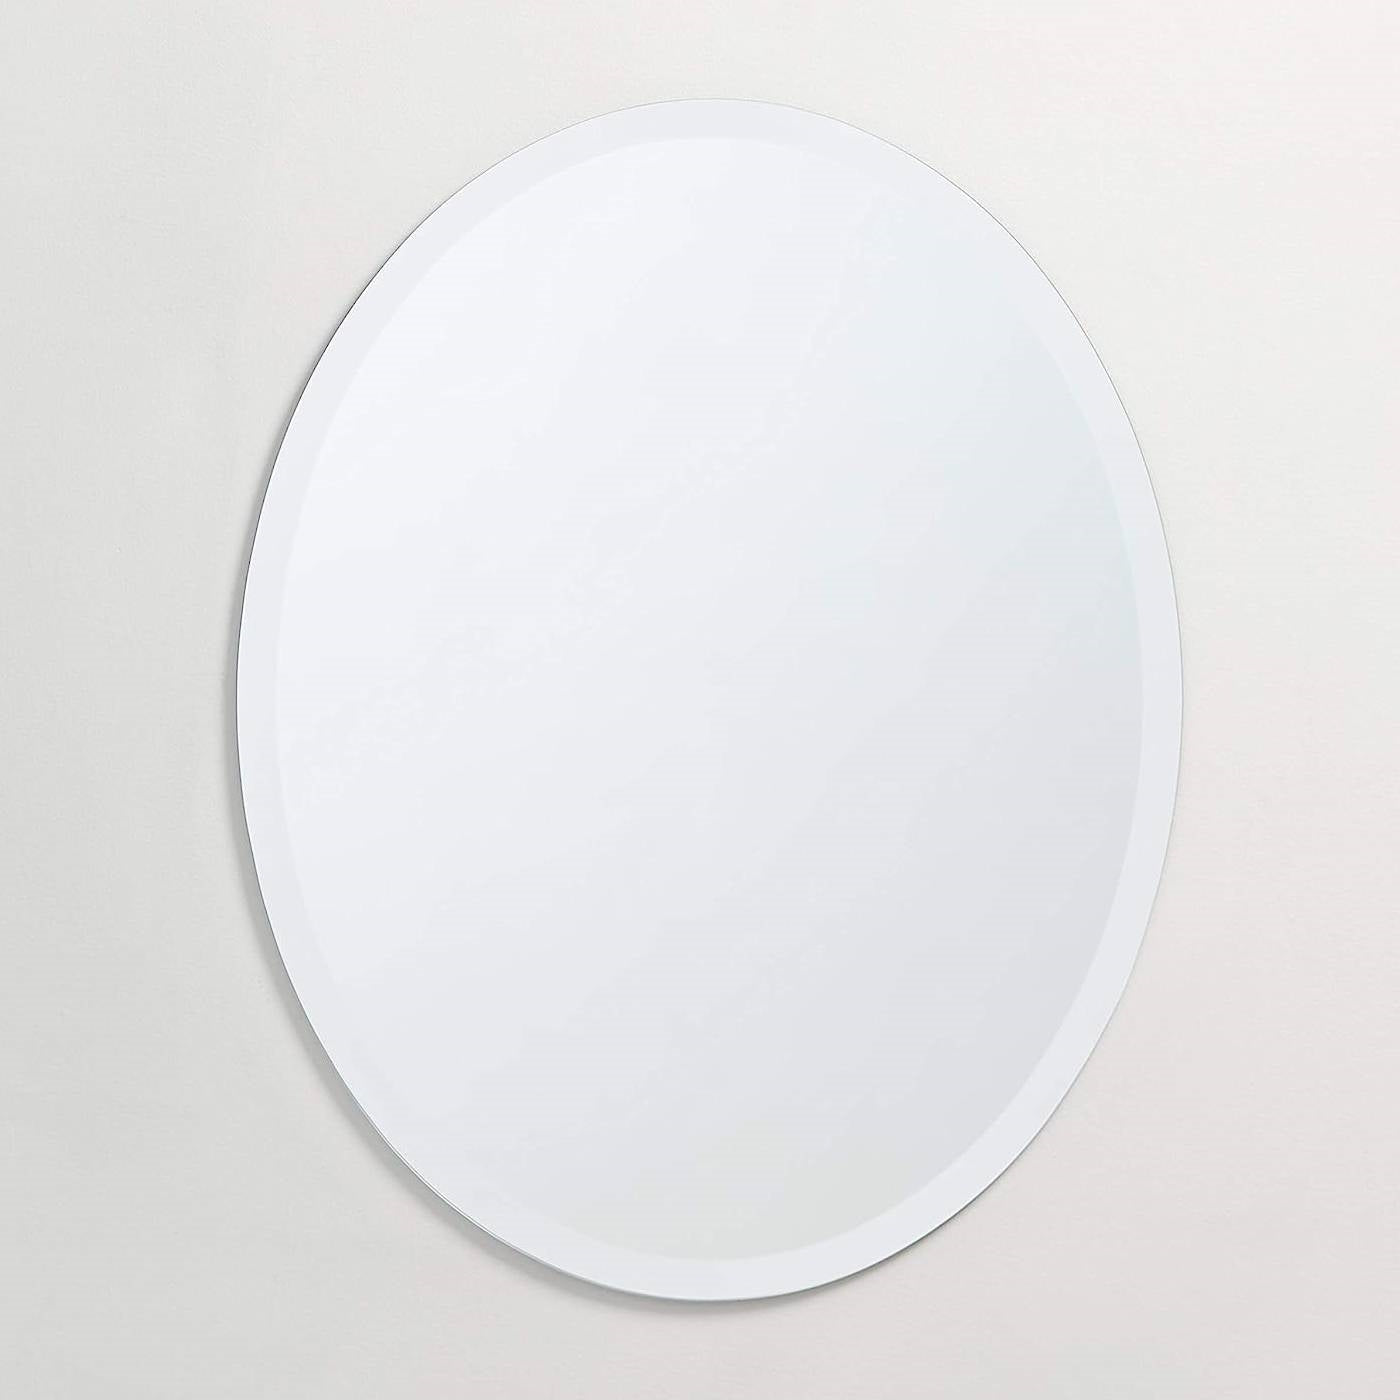 Accents > Mirrors - Oval Frameless 36-inch Beveled Bathroom Bedroom Living Room Vanity Wall Mirror